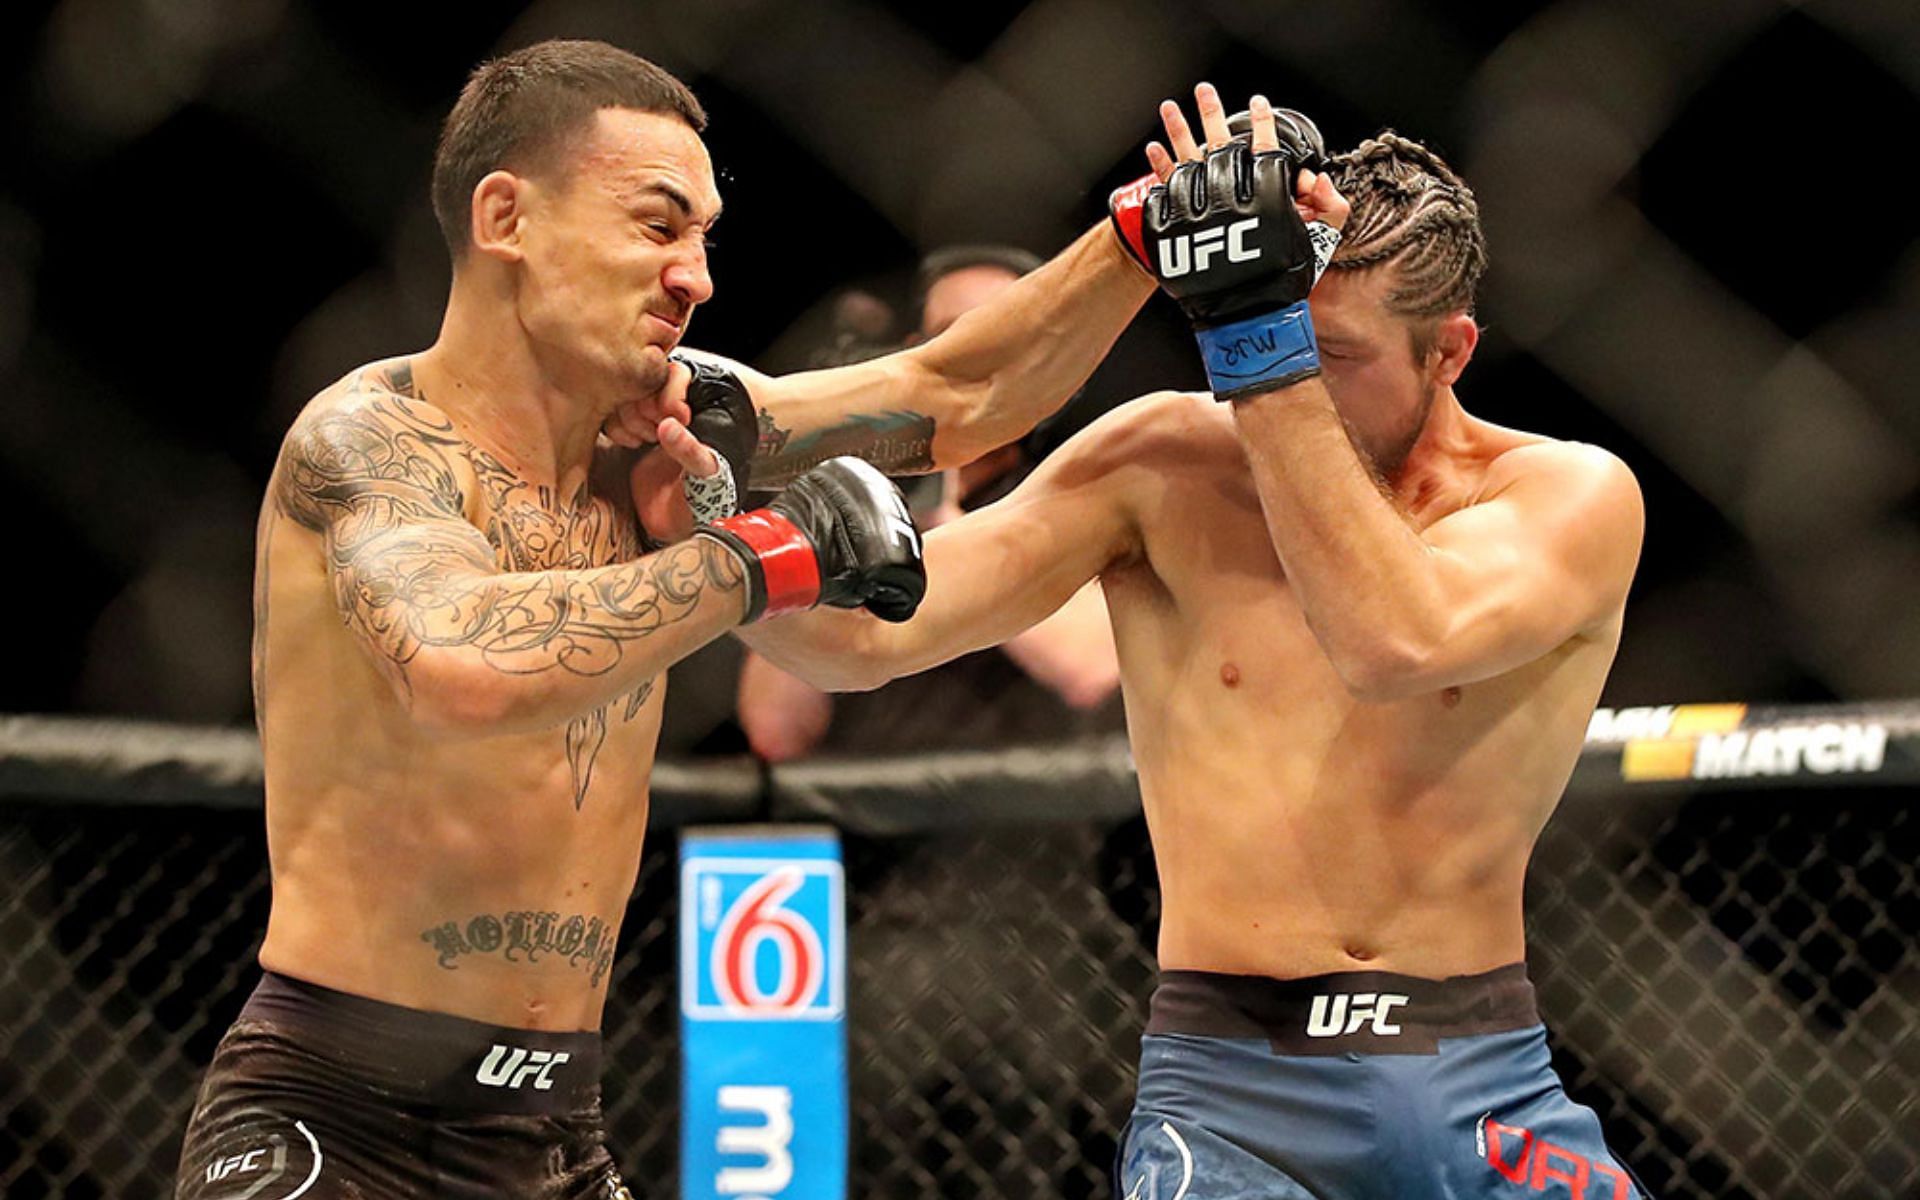 Max Holloway and Brian Ortega are both amongst the most exciting featherweights